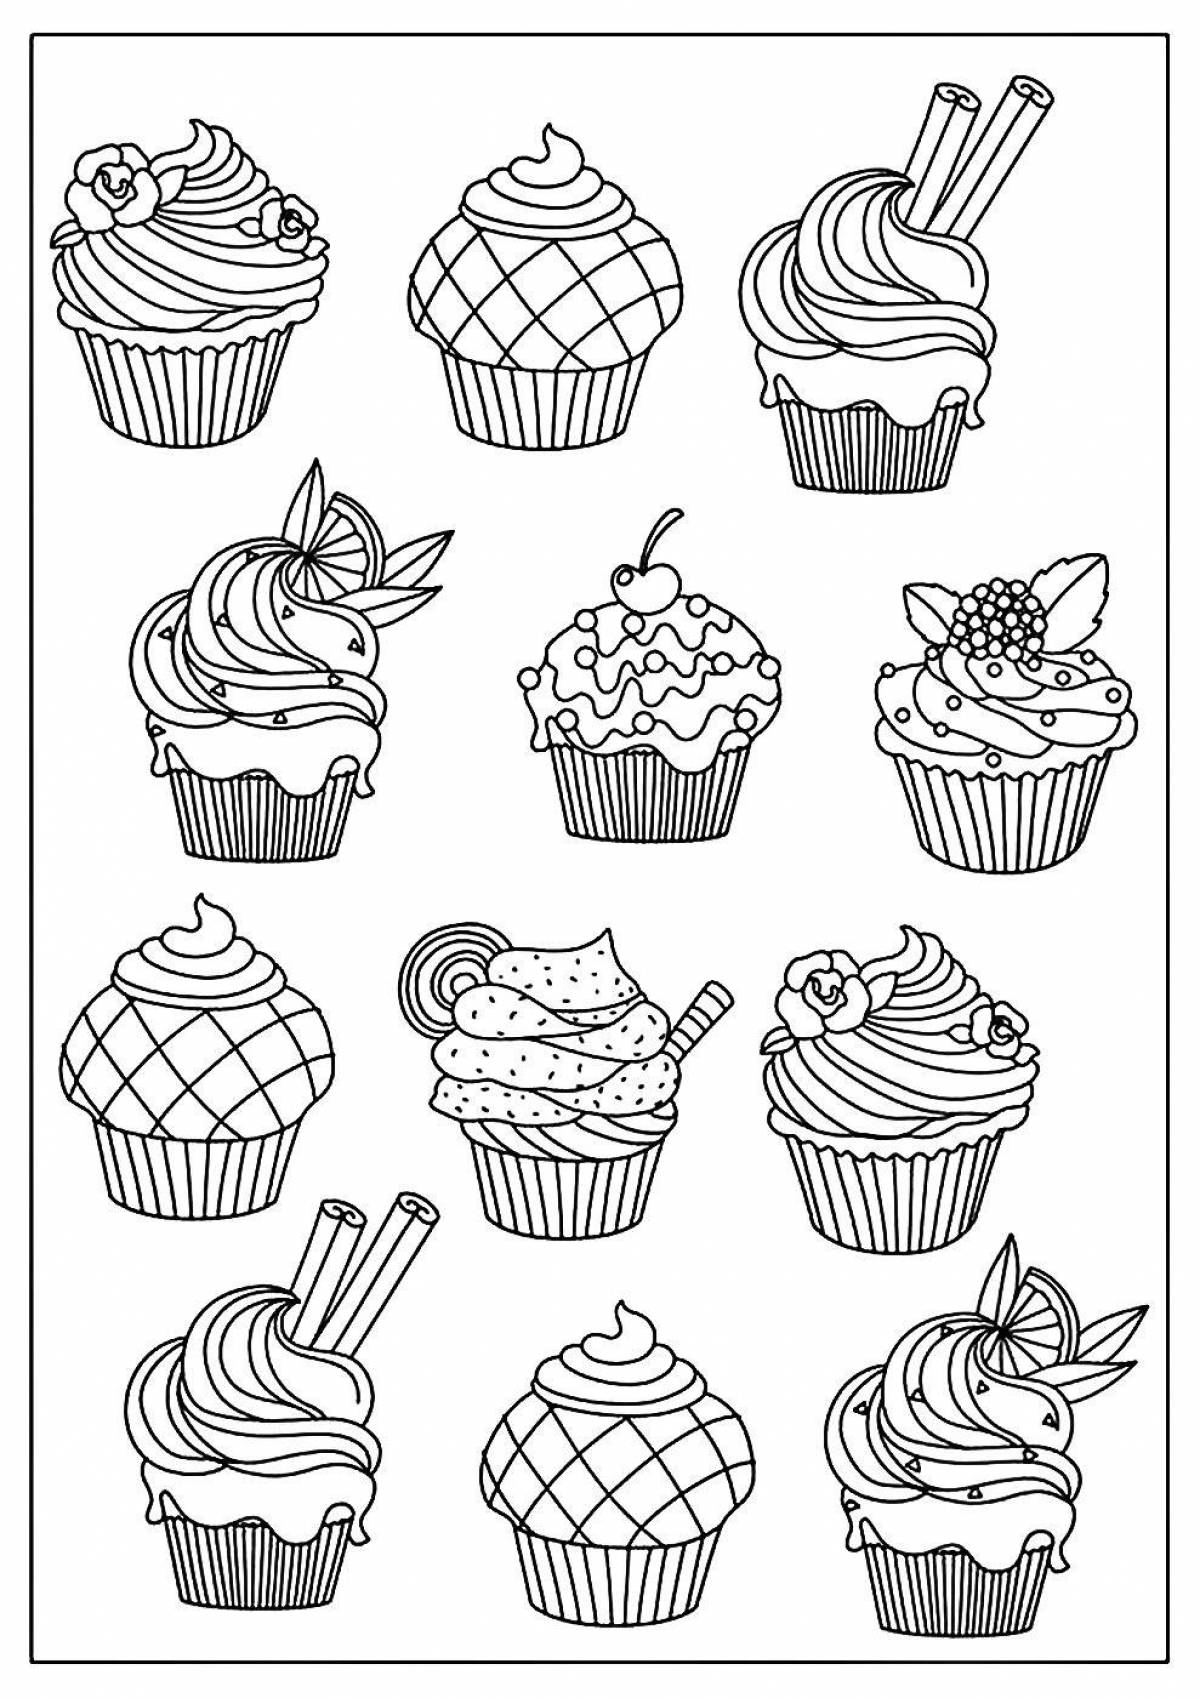 Color-filled coloring page thumbnail